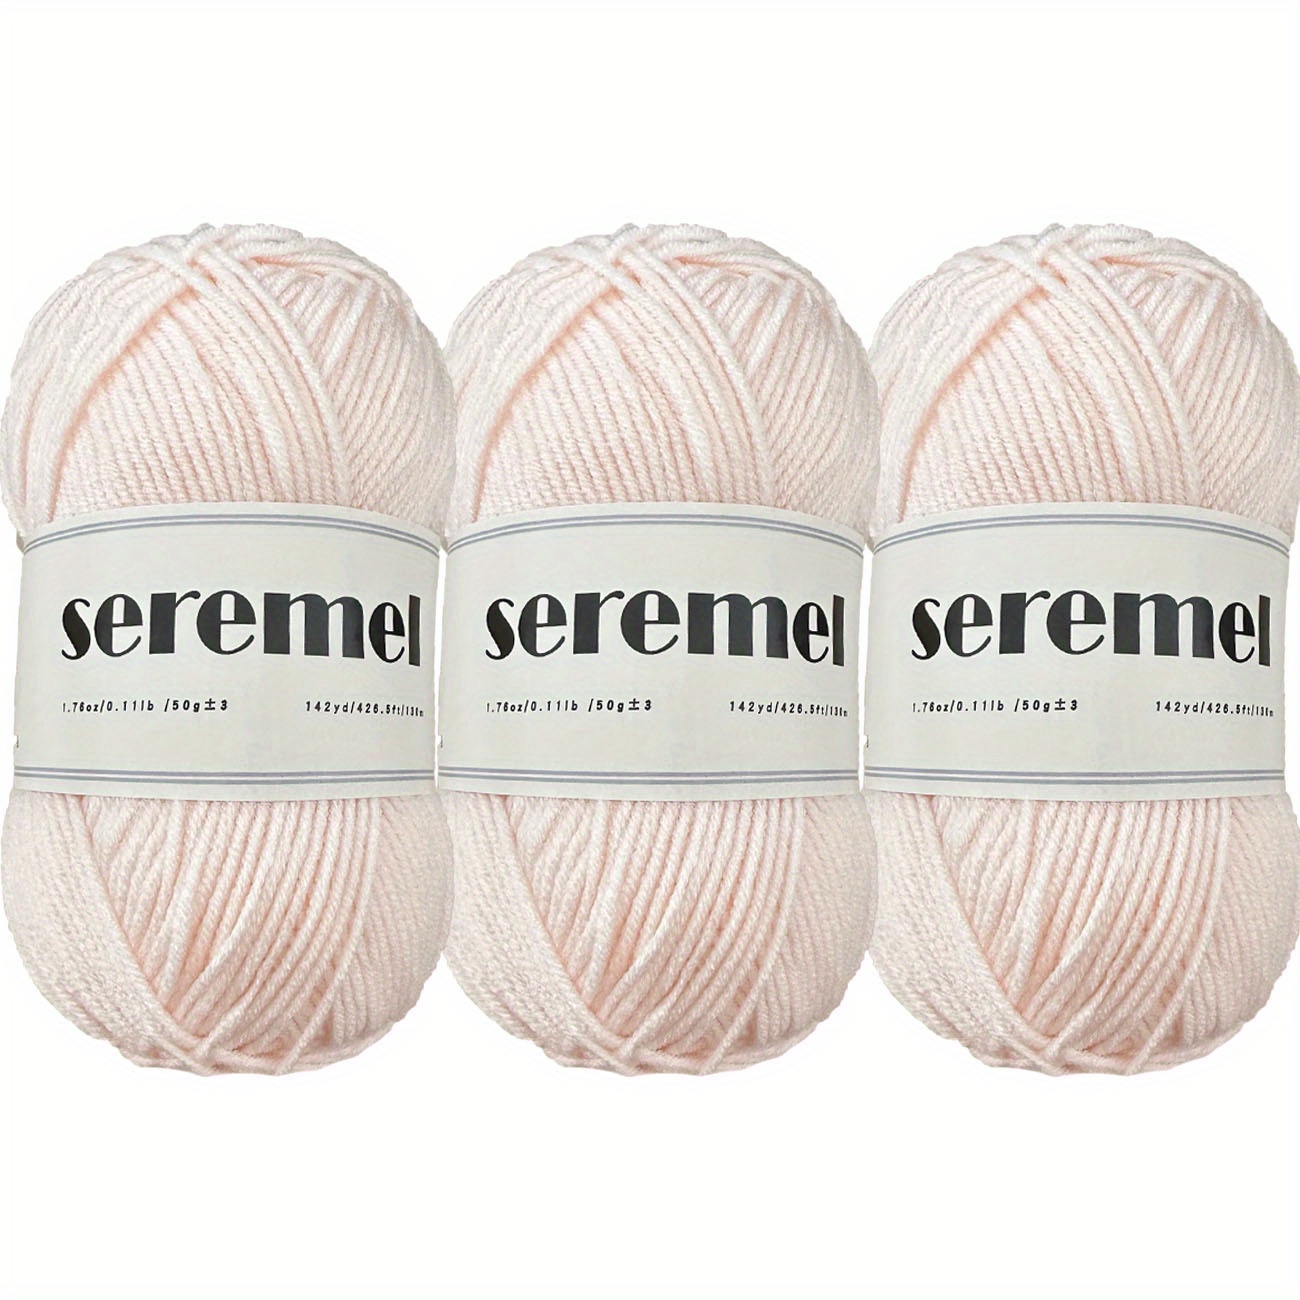 Knitting for kids with Cotton Supreme yarn